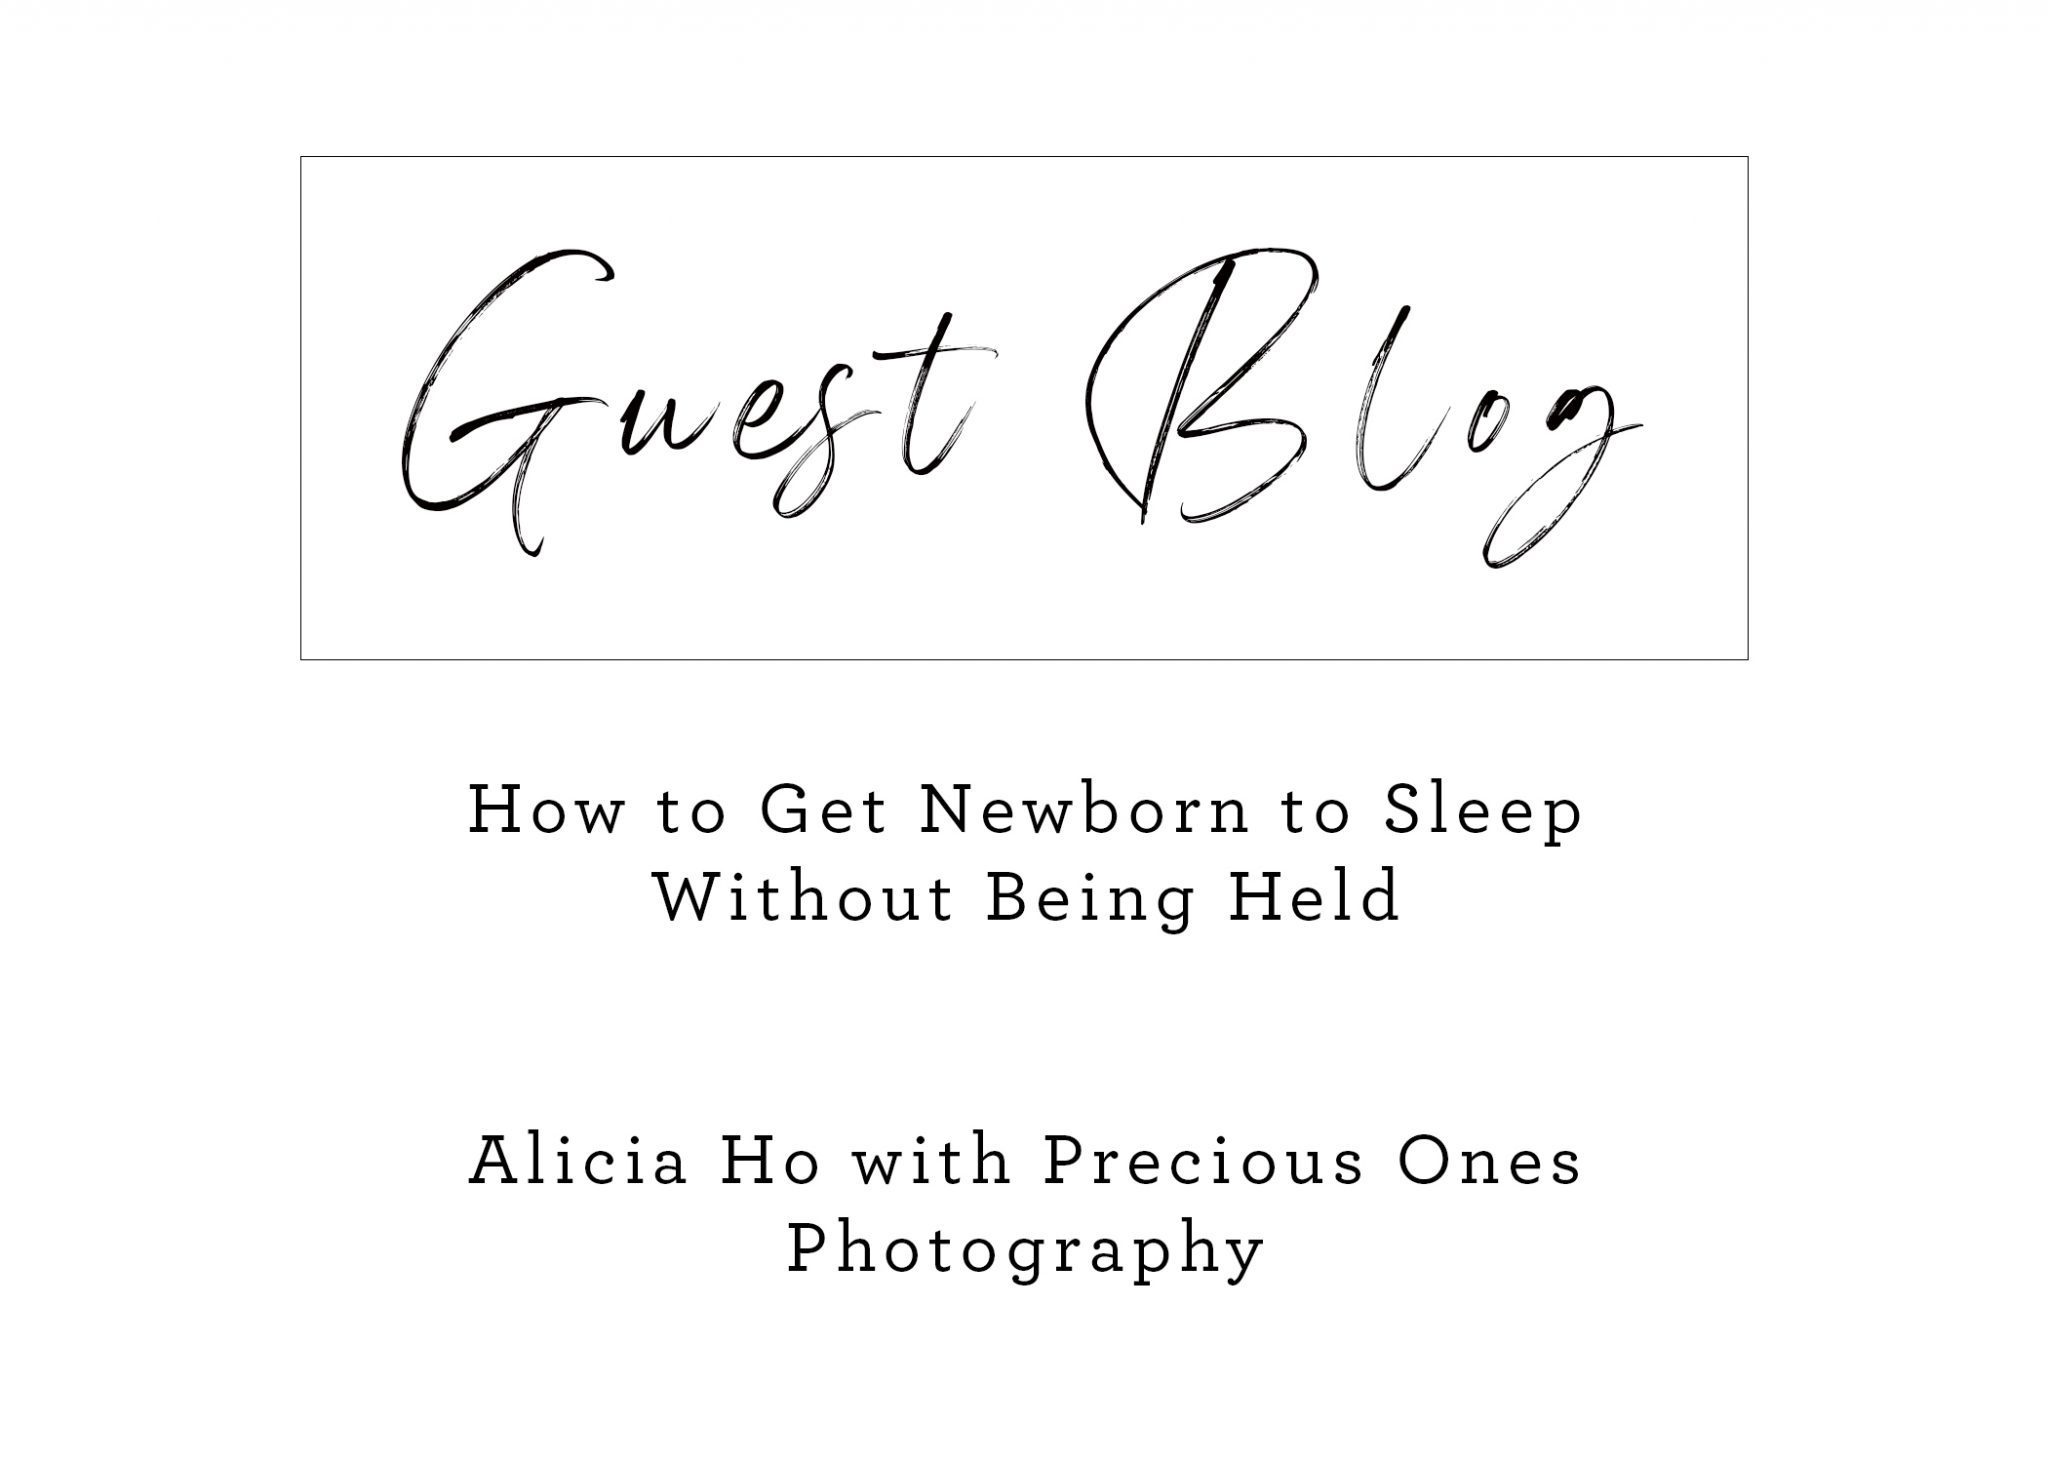 How to get newborn to sleep without being held